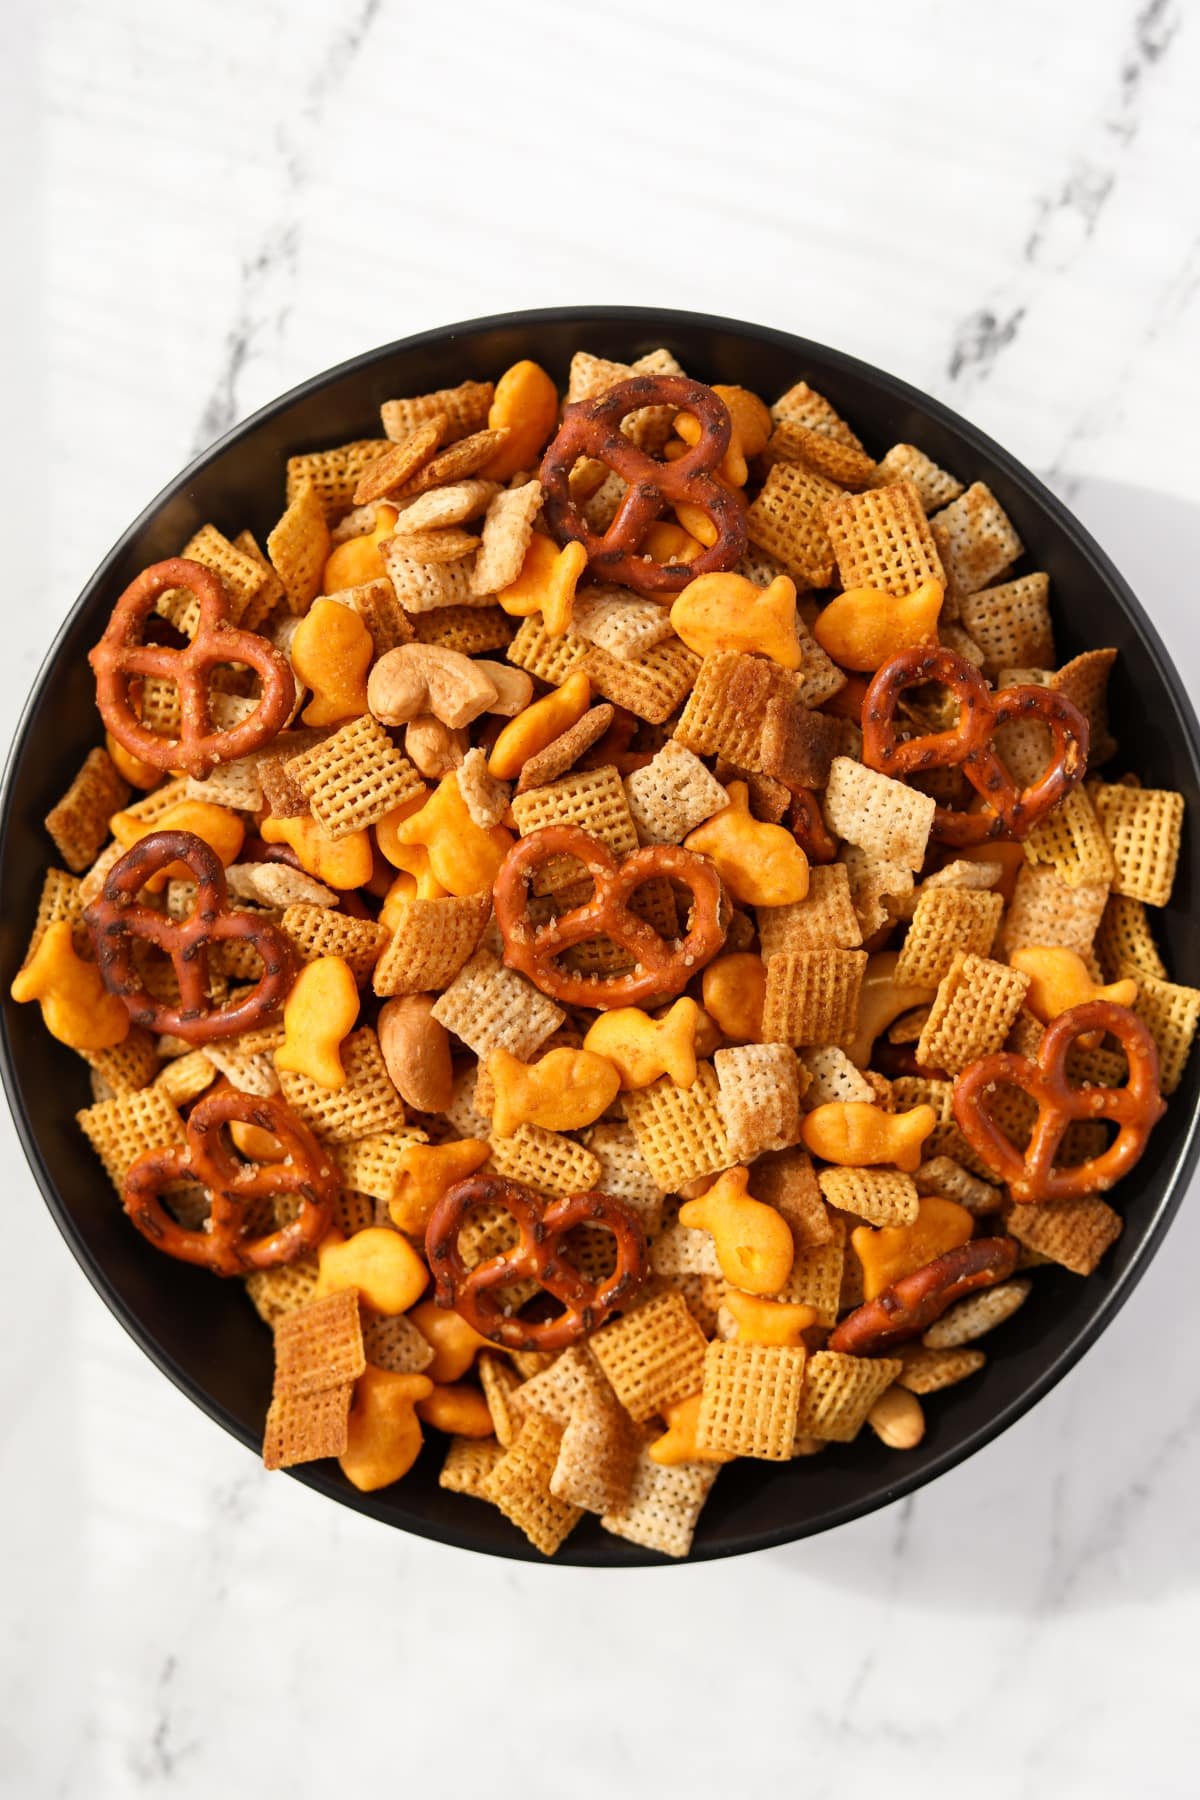 A bowl of homemade snack mix with pretzels, crackers, cereal, and nuts.